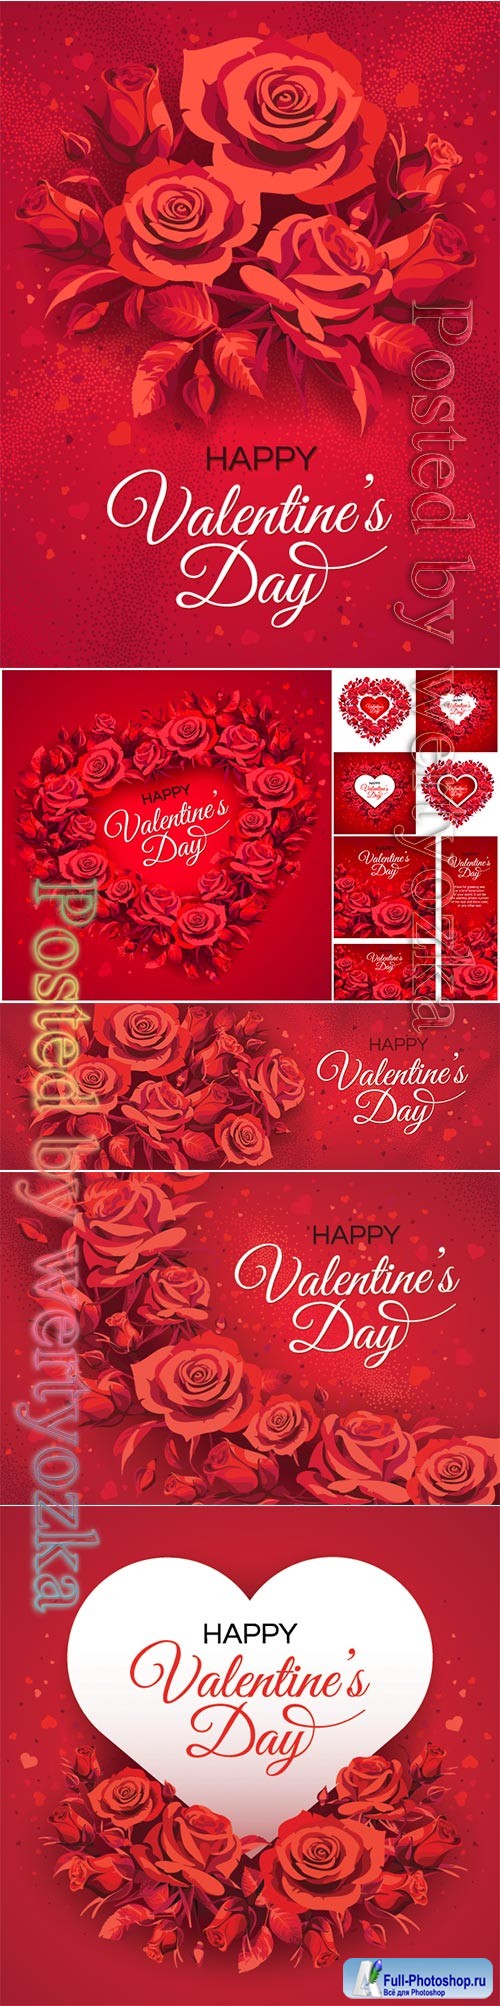 Valentine's Day greeting card templates with red roses